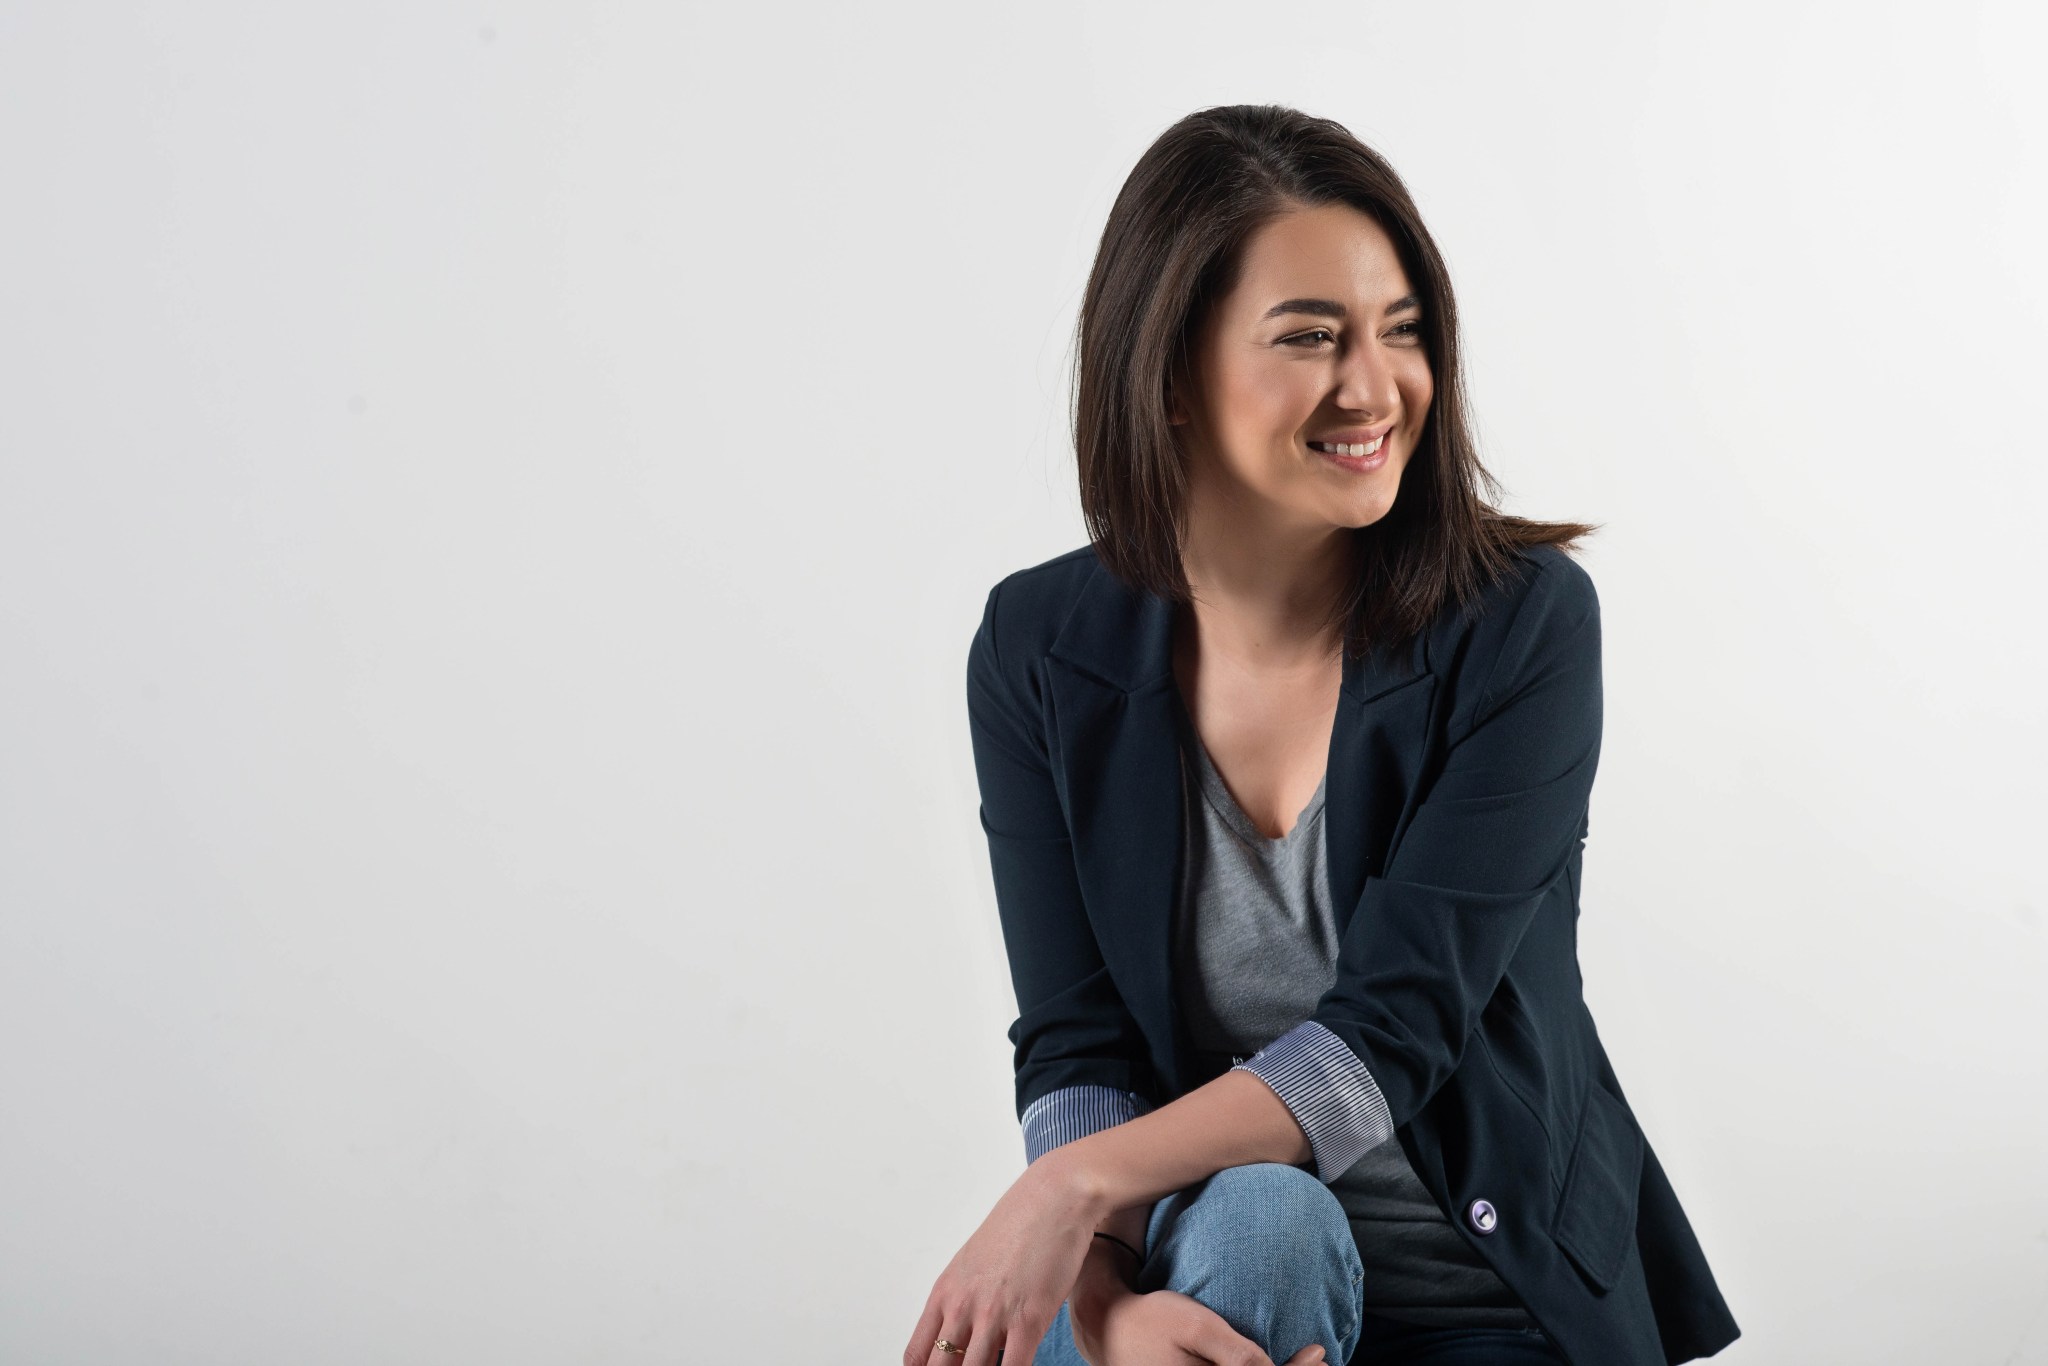 Woman with tan skin and dark brown hair looks off camera and smiles. She is sitting in front of a white background and wears jeans, a grey shirt, and a black blazer. 